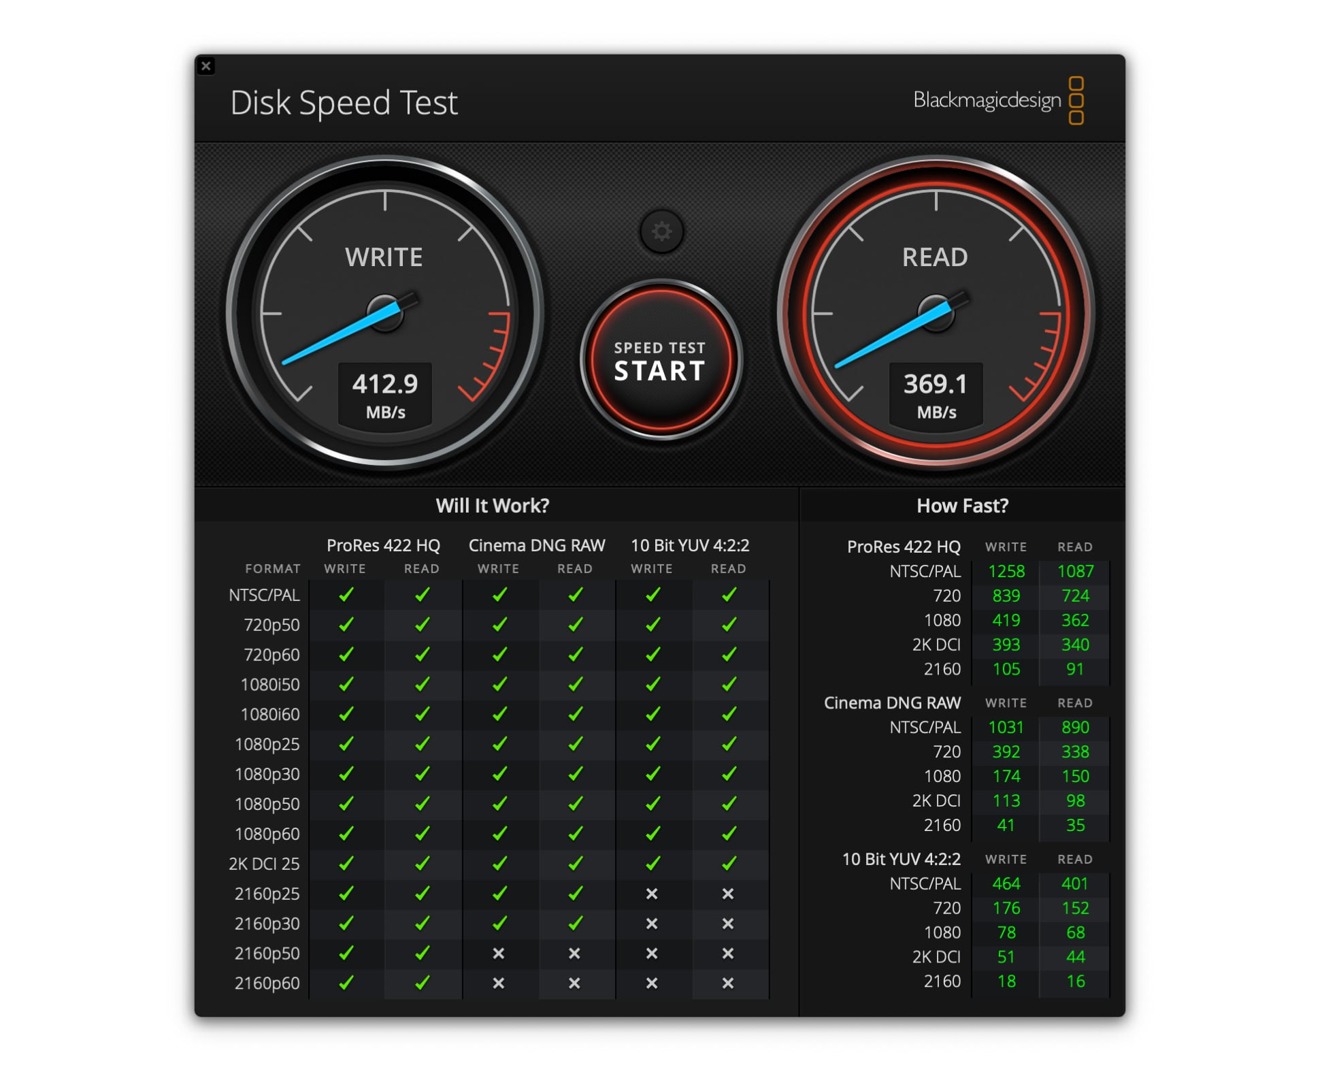 The Disk Speed Test for the TerraMaster D5-300C